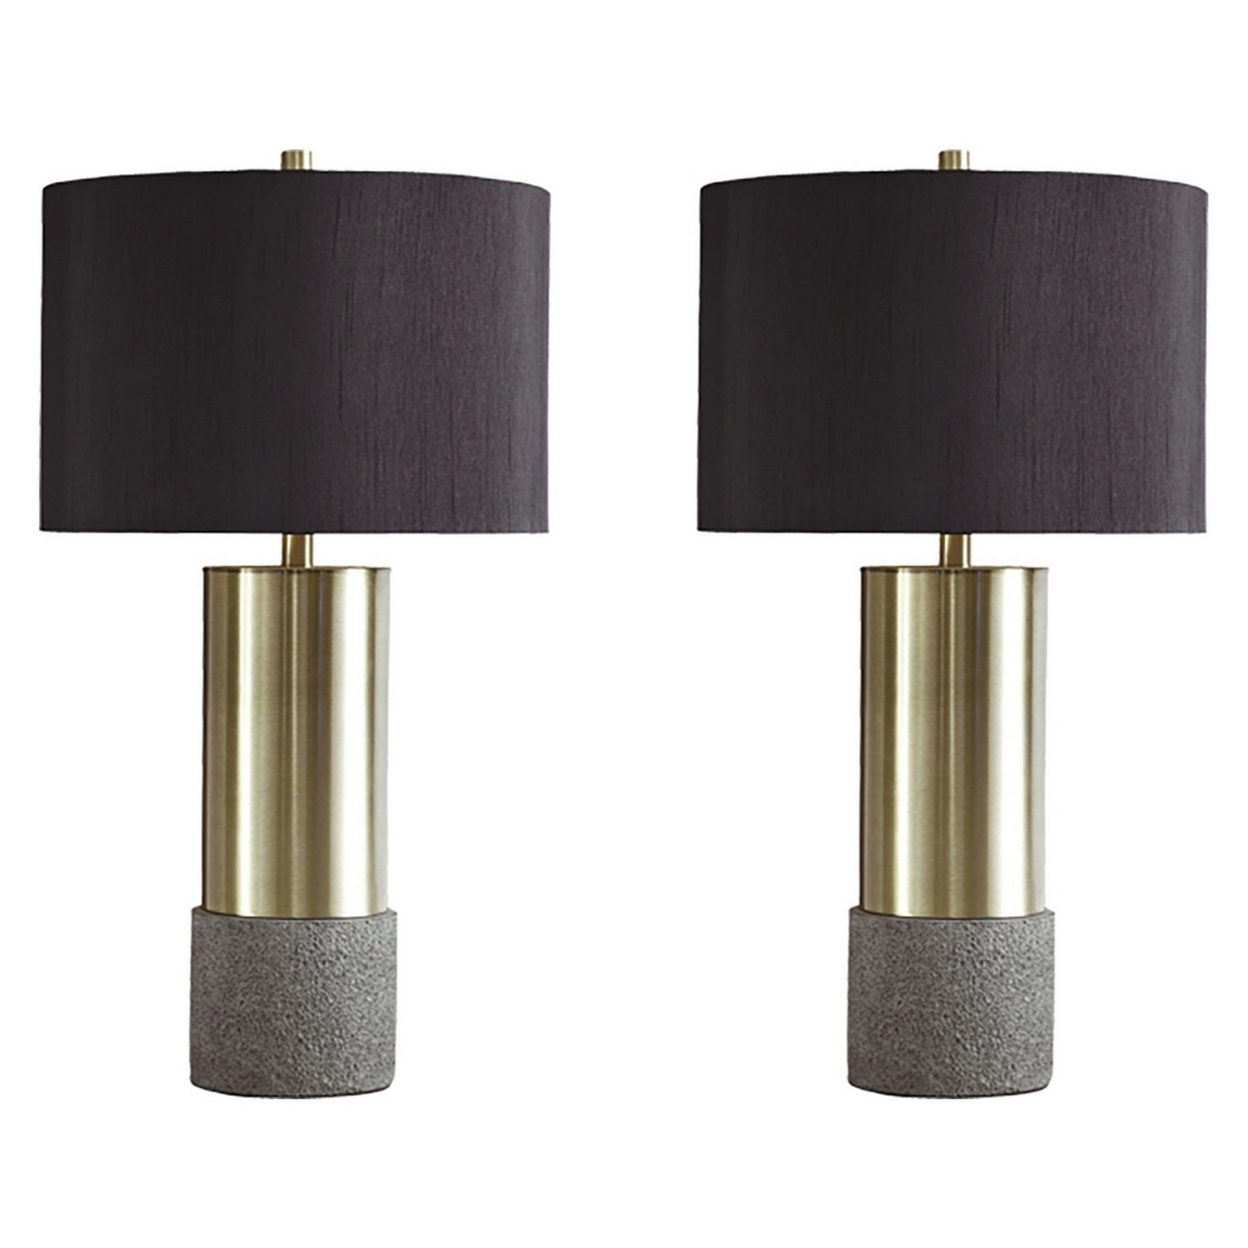 Faux Concrete And Metal Base Table Lamp, Set Of 2, Brass And Gray- Saltoro Sherpi